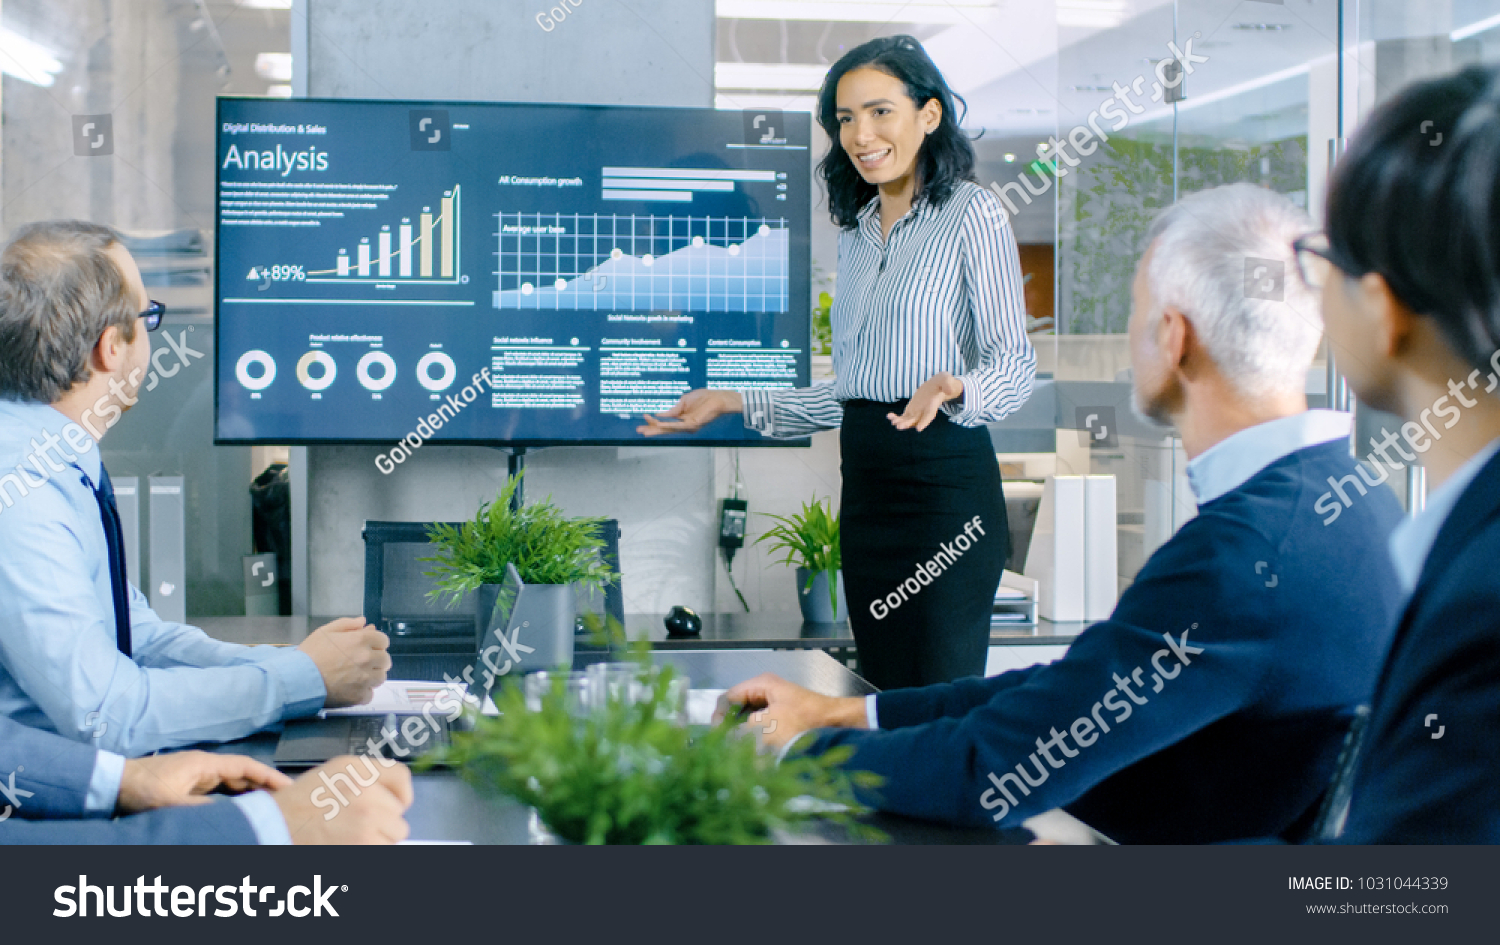 Beautiful Businesswoman Gives Report/ Presentation to Her Business Colleagues in the Conference Room, She Shows Graphics, Pie Charts and Company's Growth on the Wall TV. #1031044339